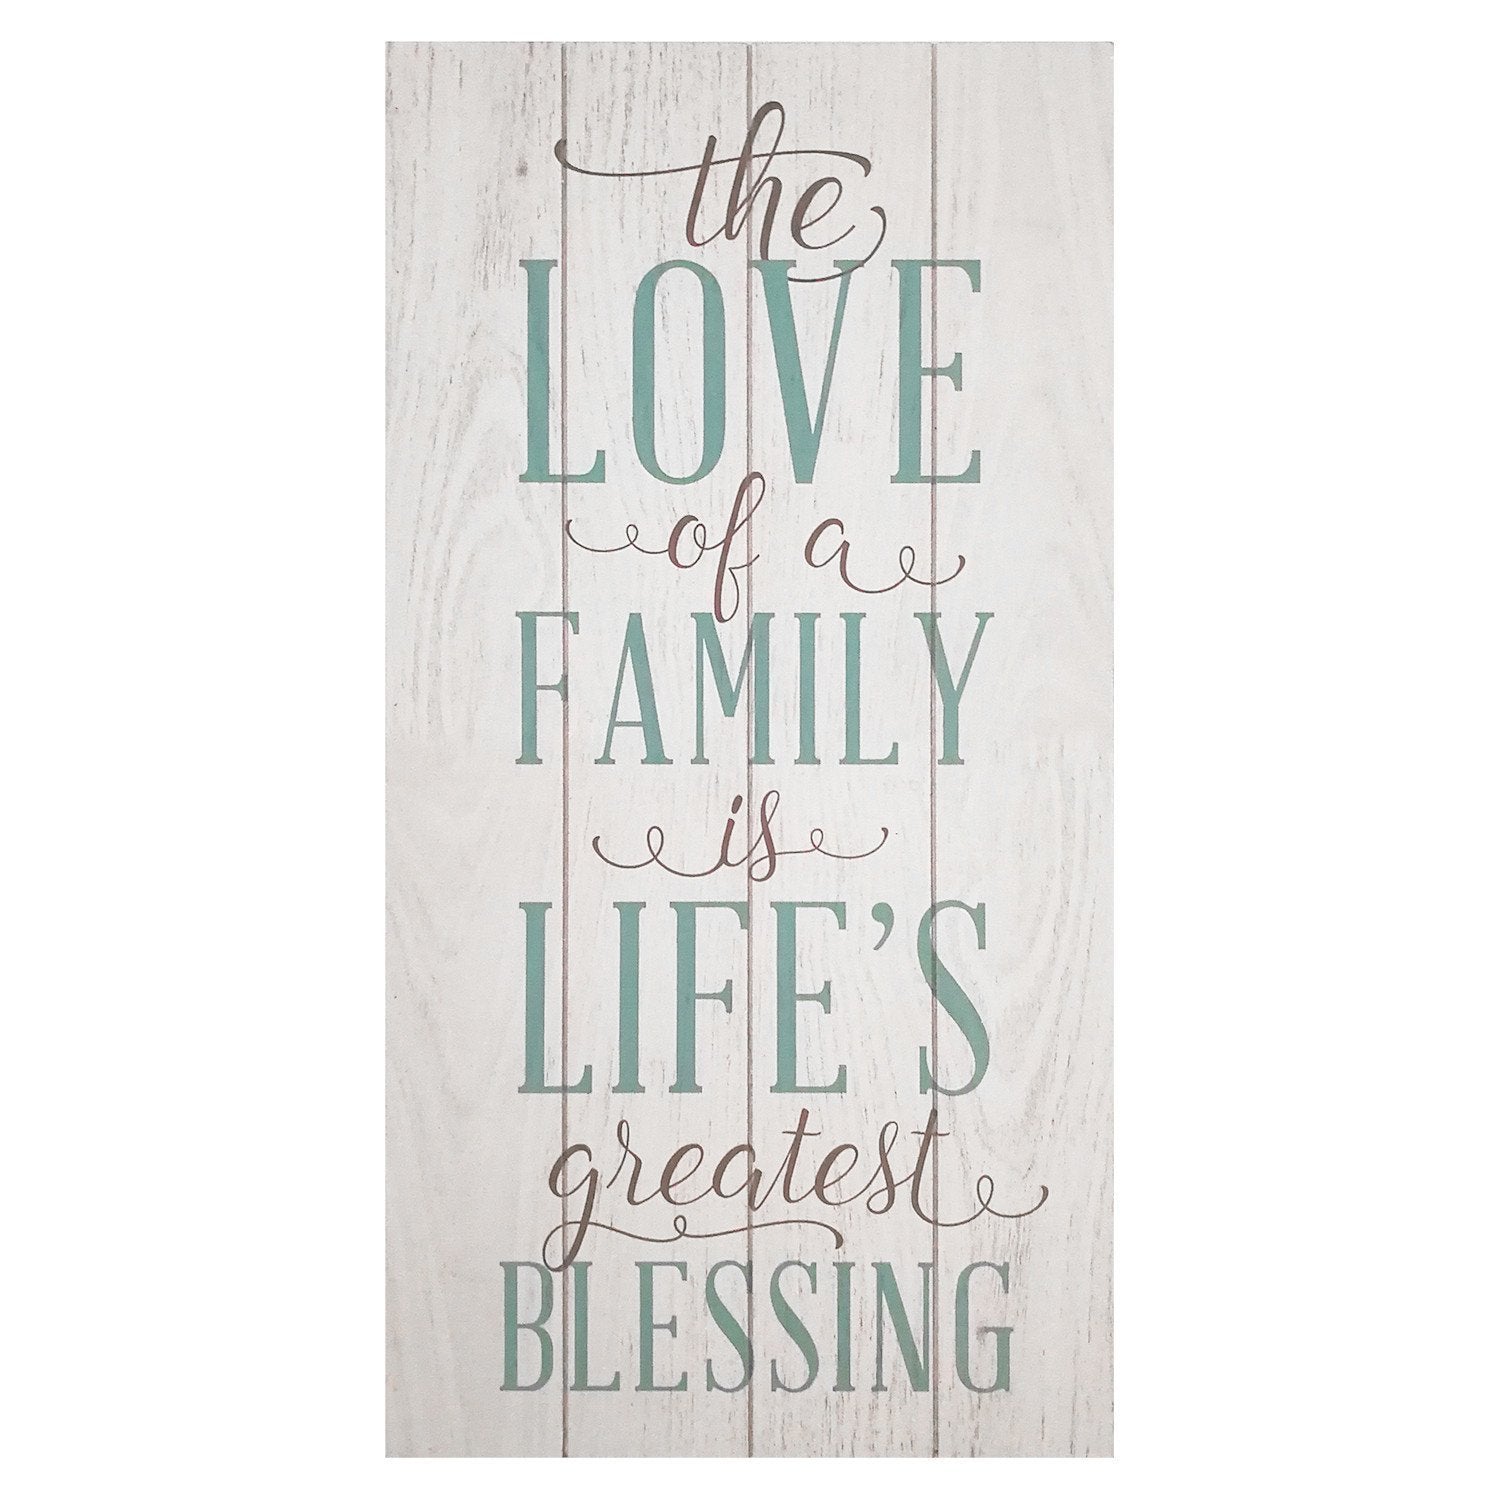 "The Love Of A Family Is A Life'S Greatest Blessing" Wooden Wall Decor - Mahogany Home Essentialswall art